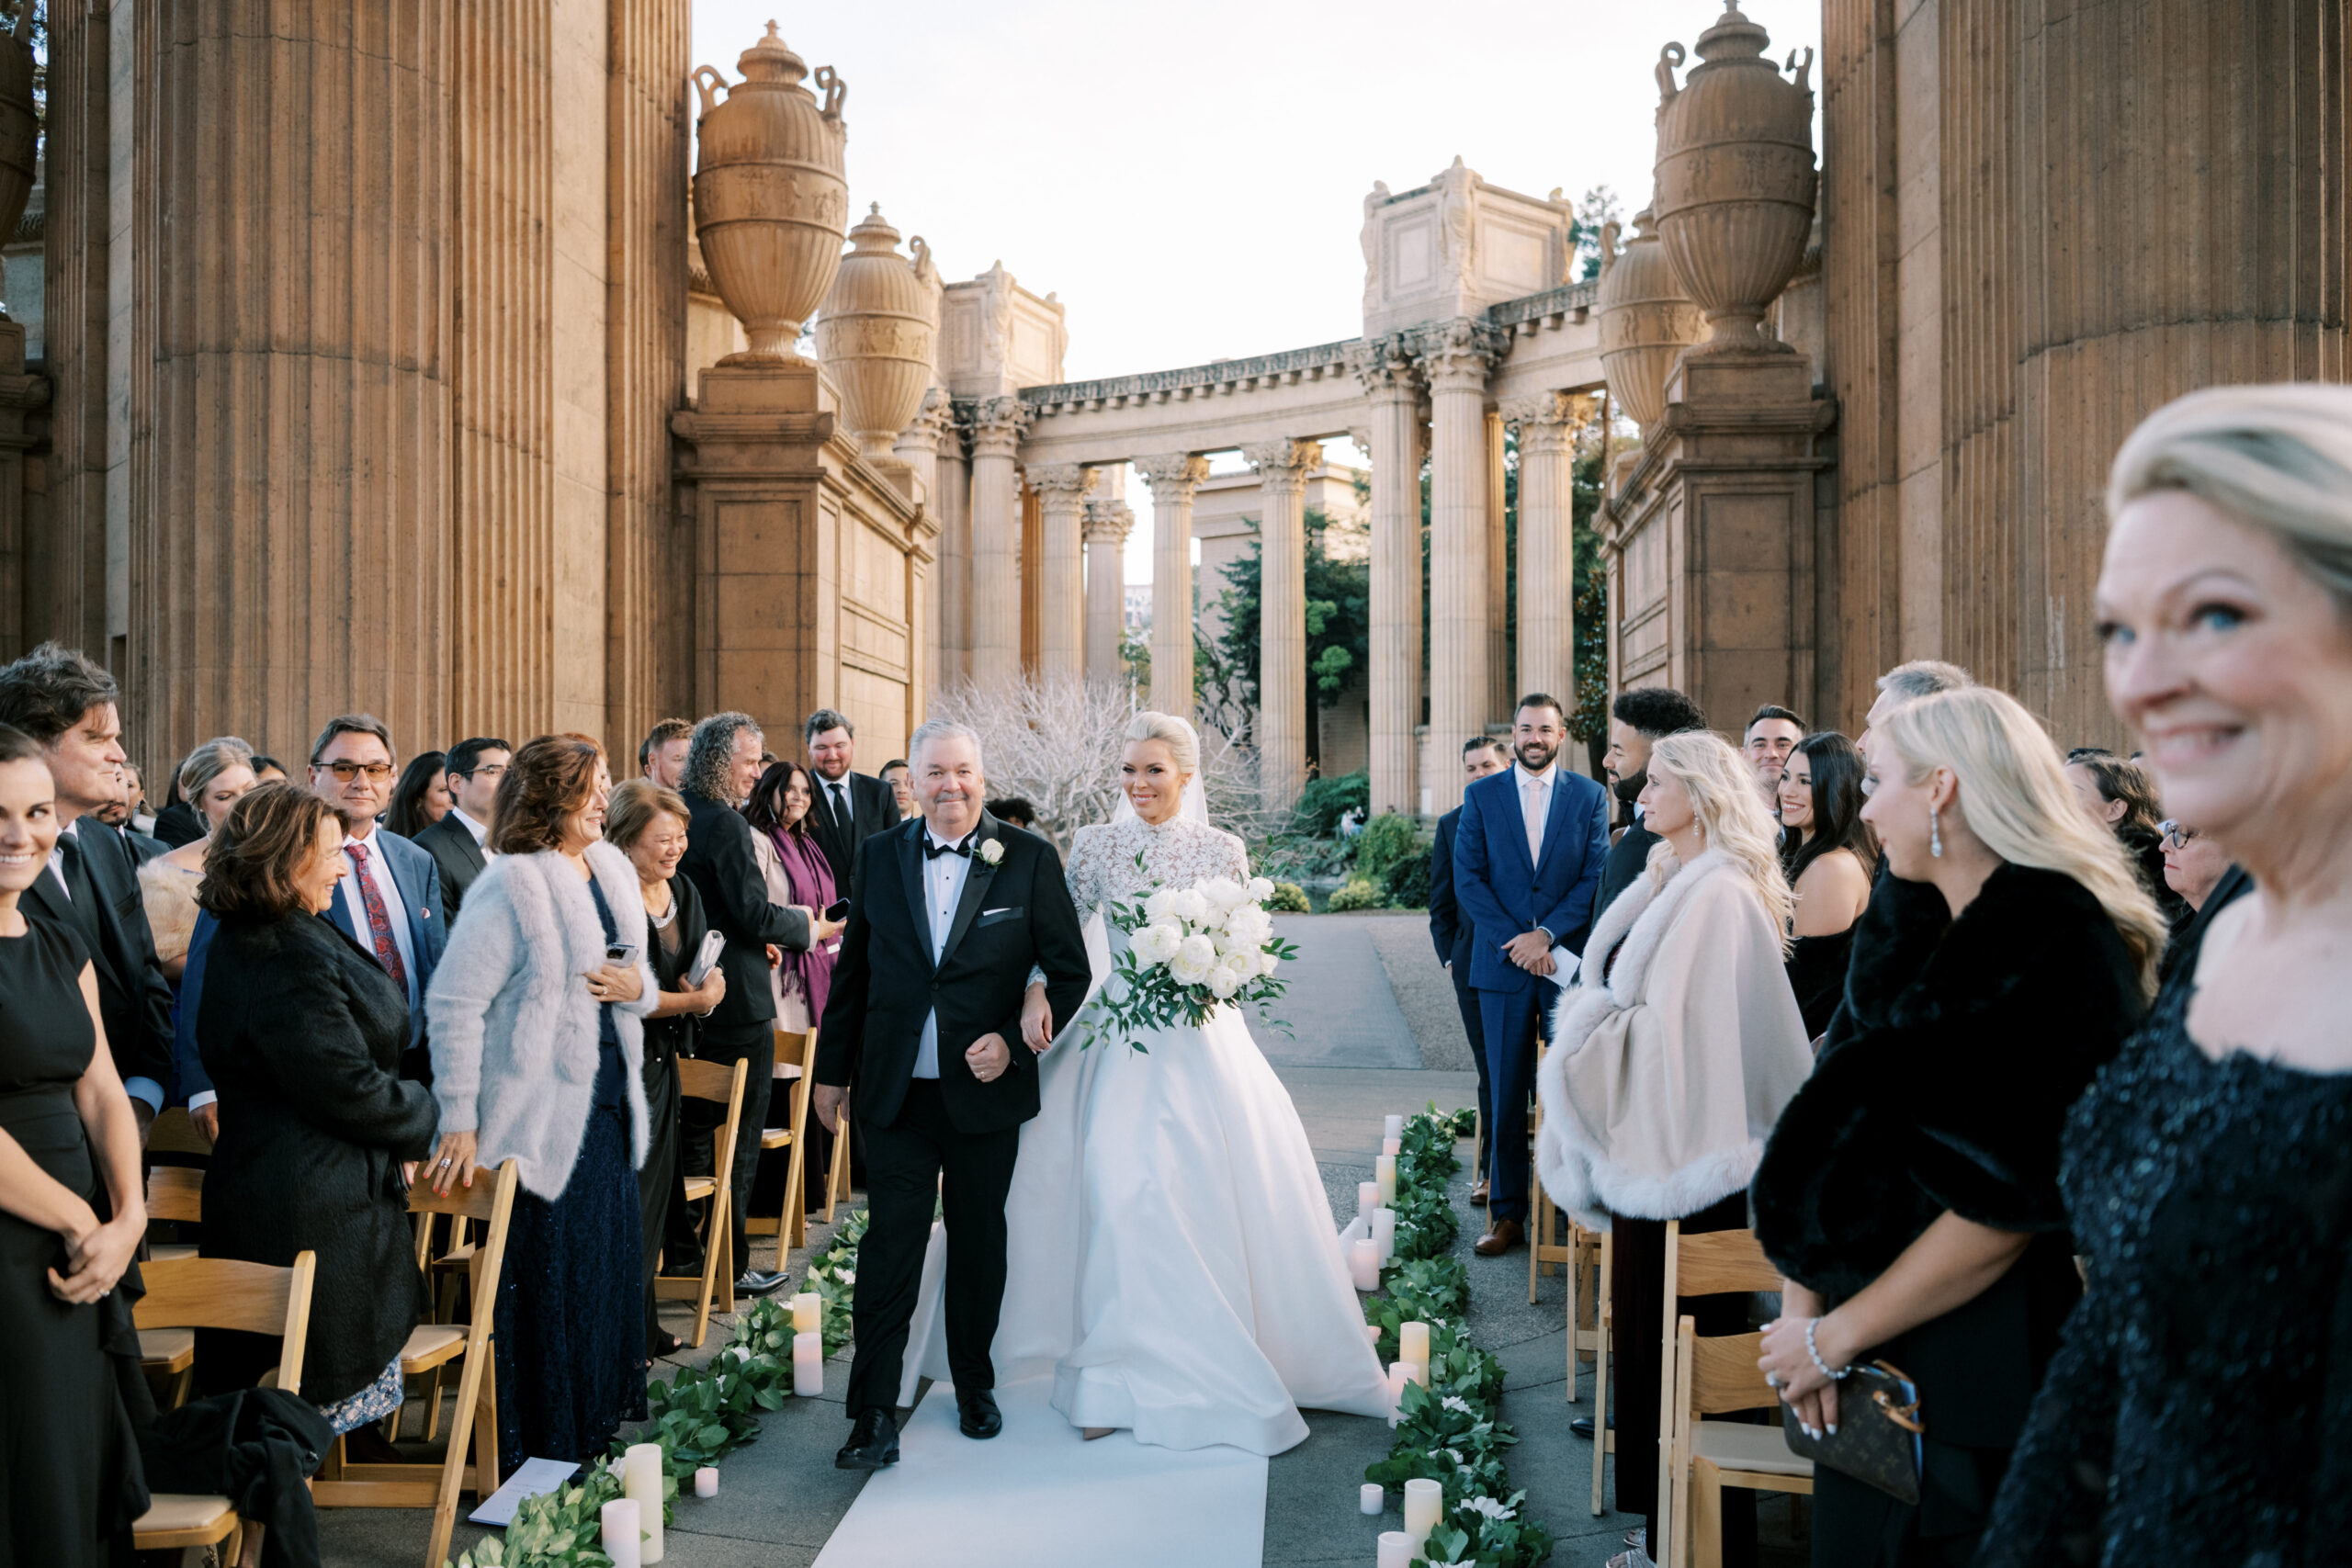 bride ascending the aisle with father